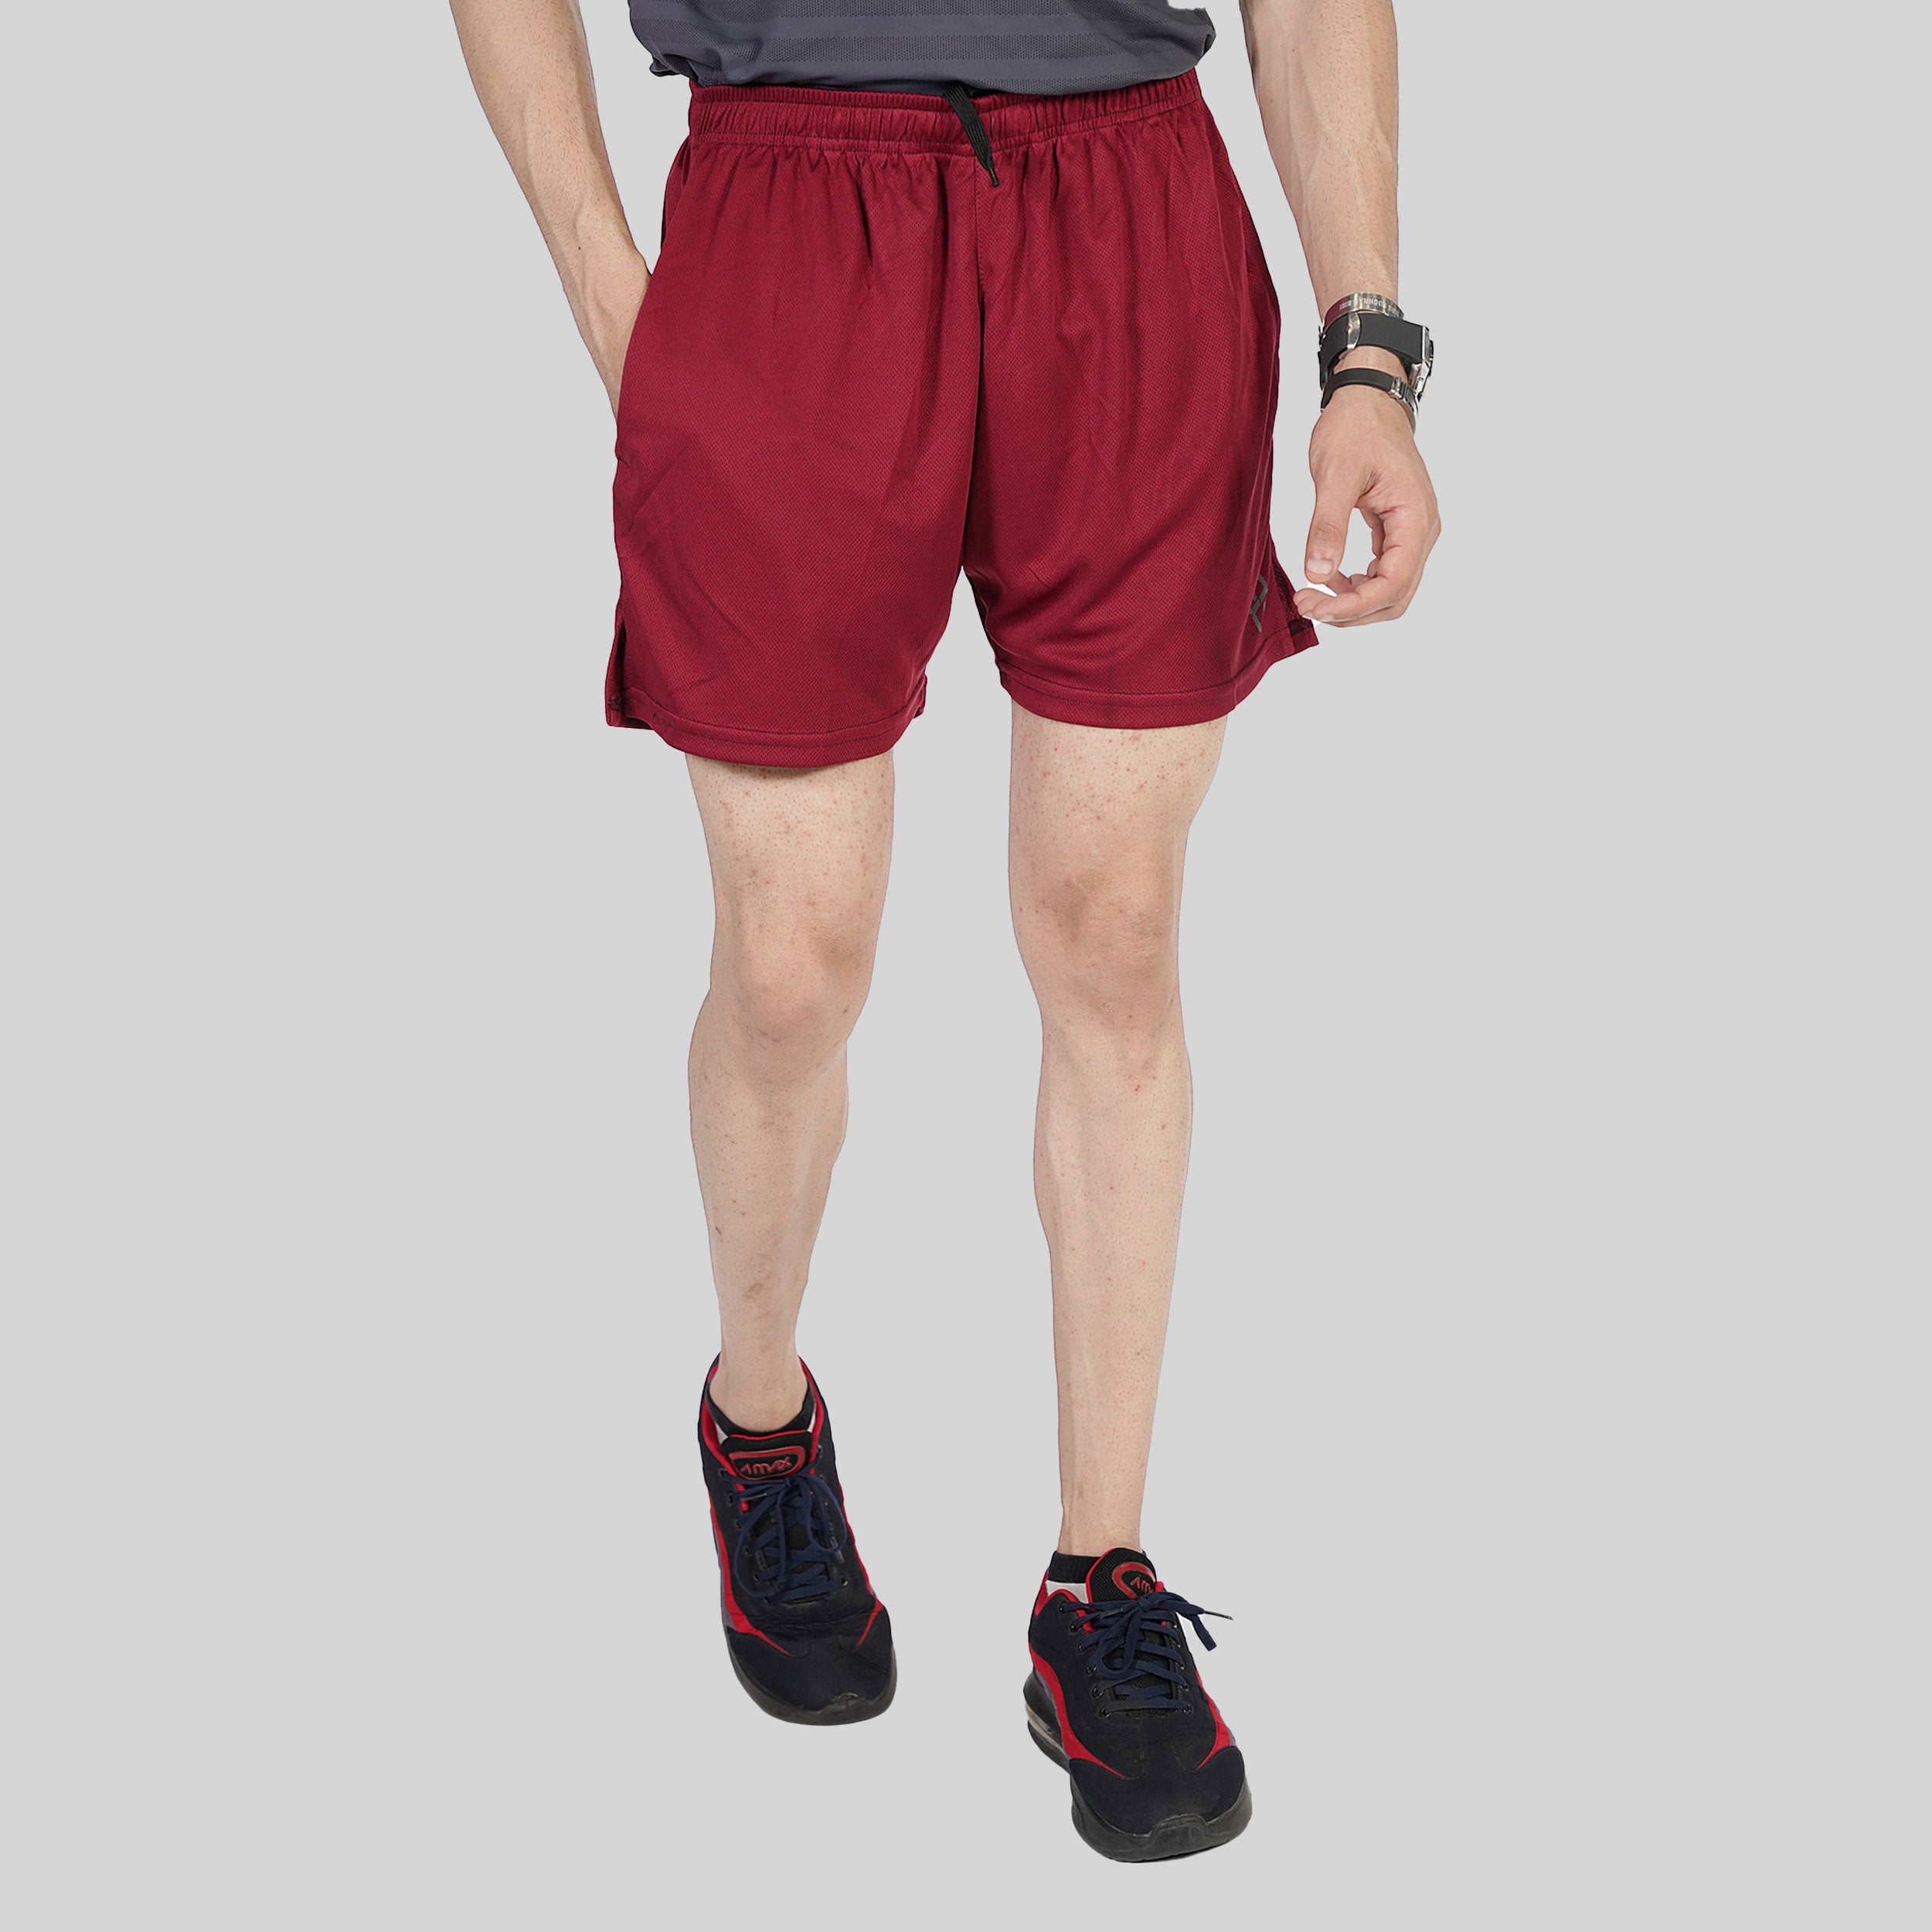 Men's Performance Tech Loose-Fit Red Shorts